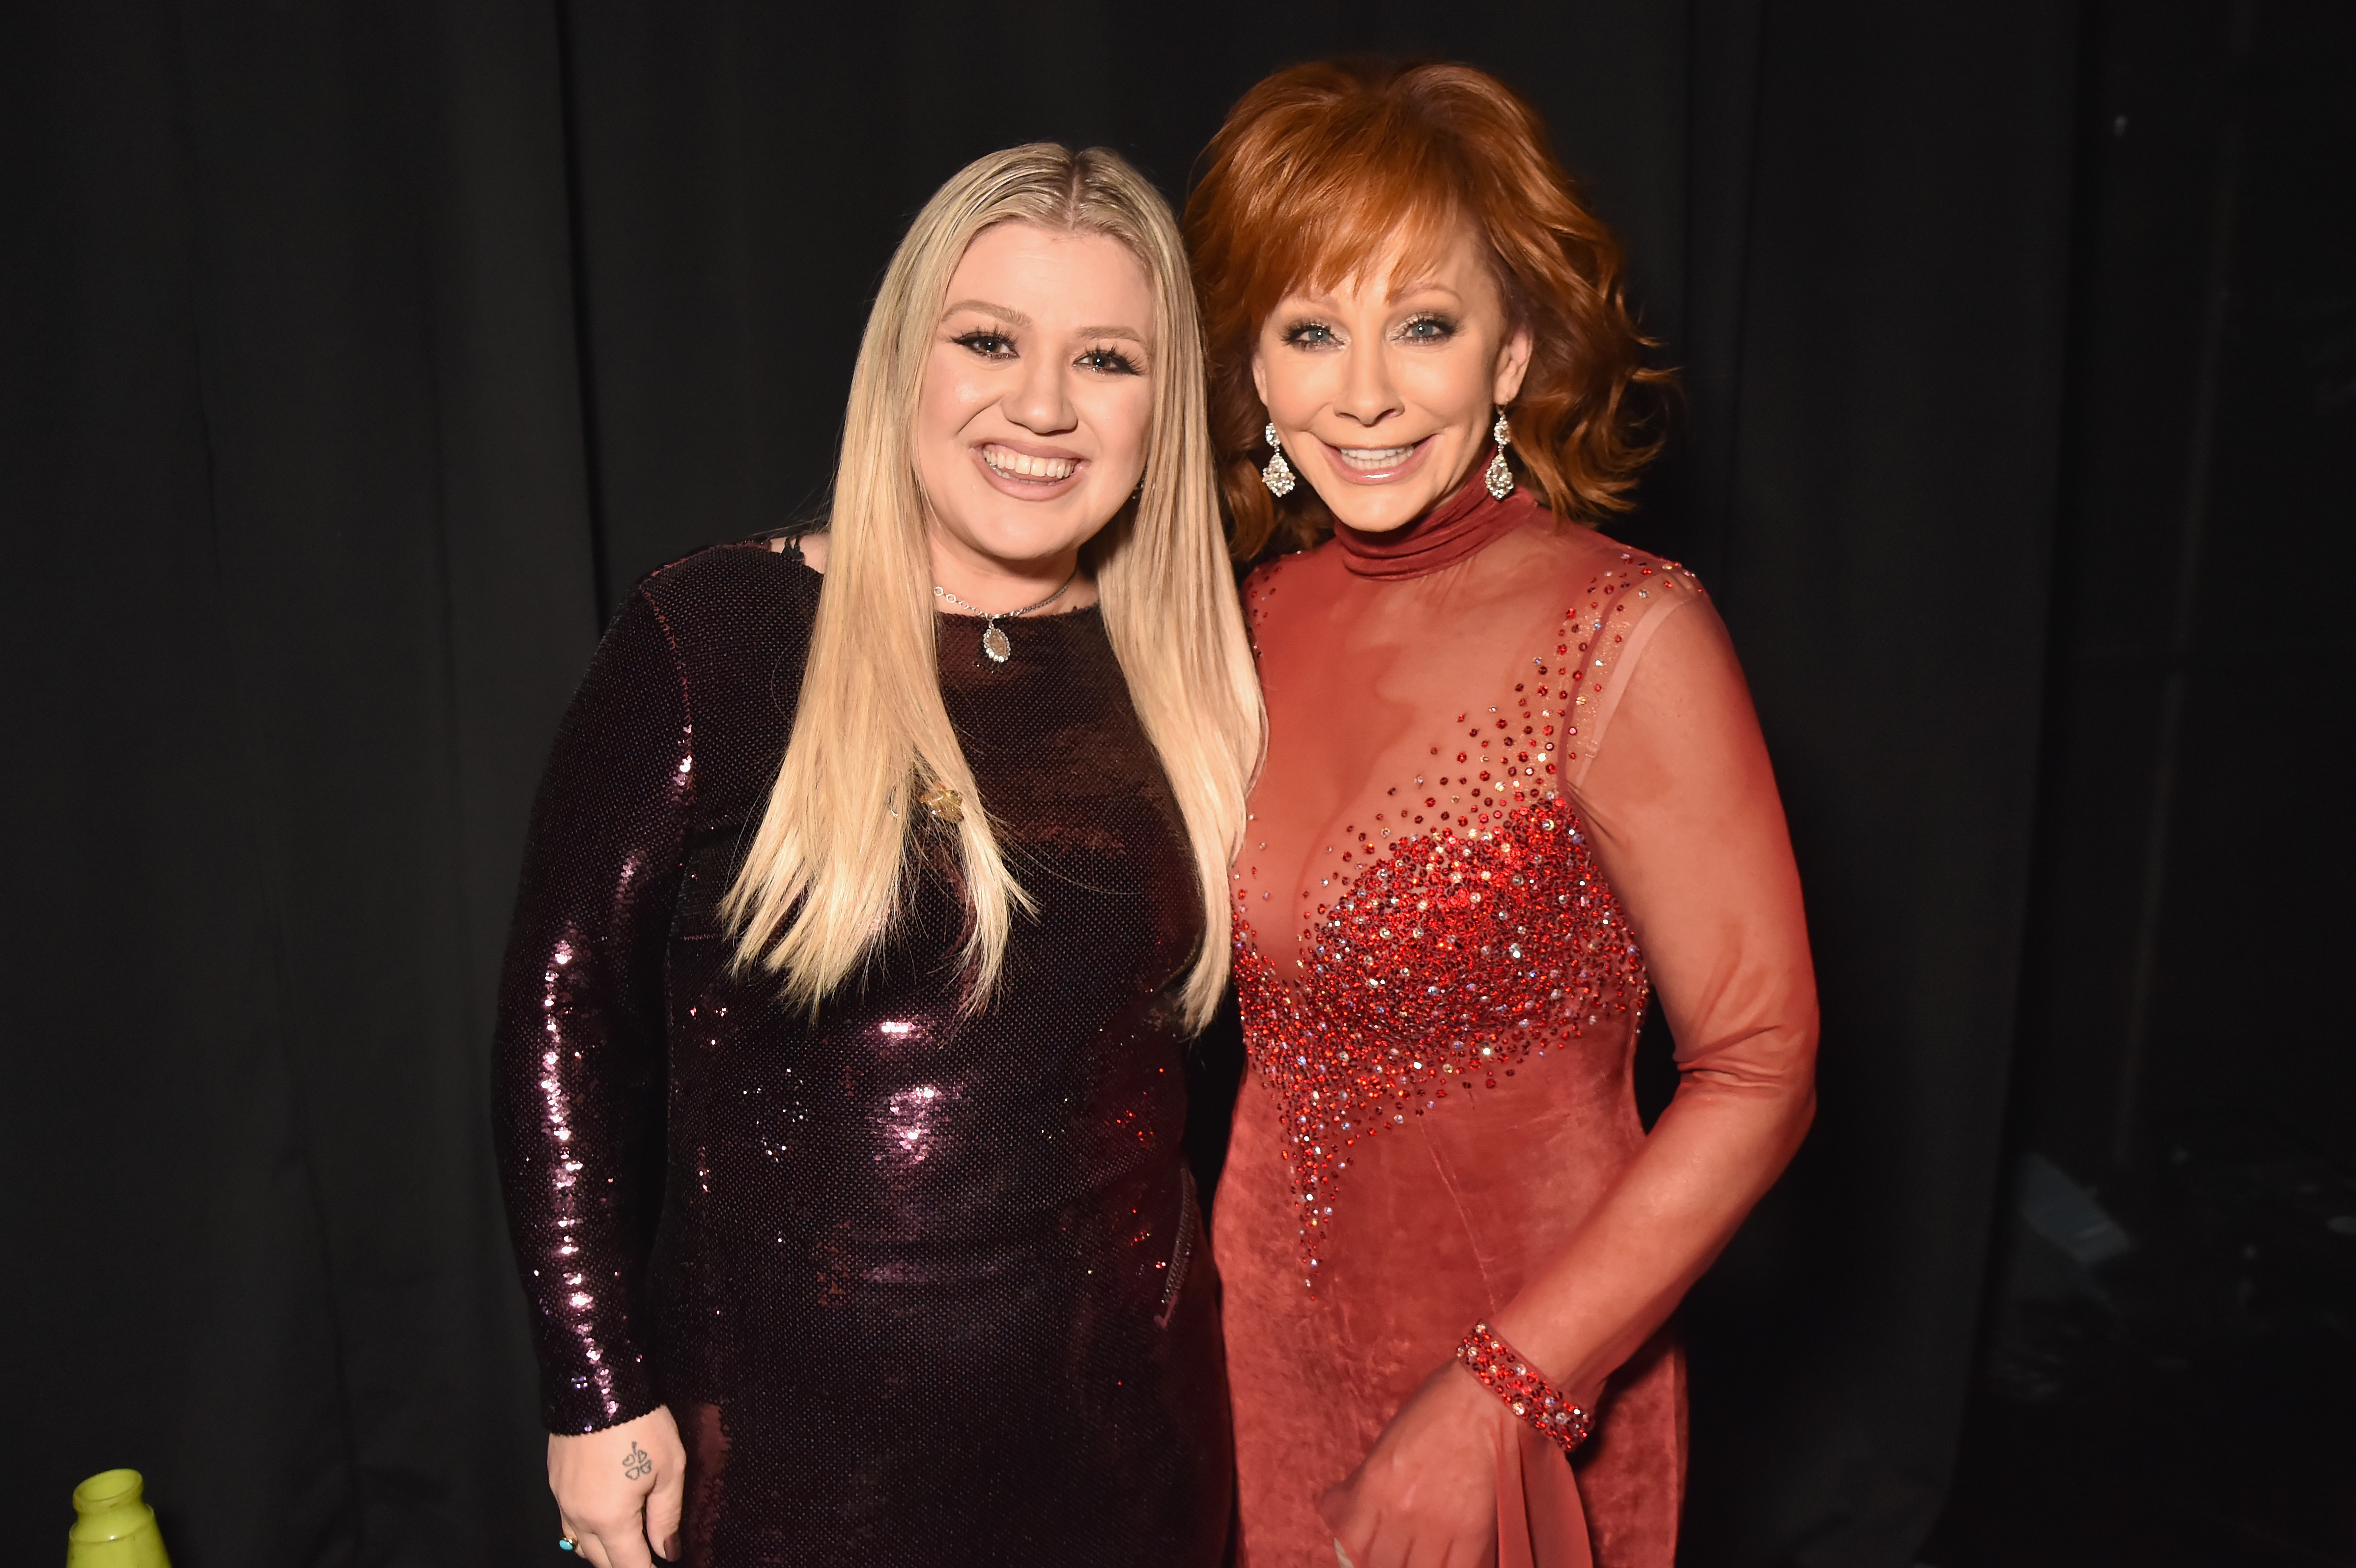 Kelly Clarkson and Reba McEntire attend the 53rd Academy of Country Music Awards in Las Vegas, Nevada, on April 15, 2018. | Source: Getty Images